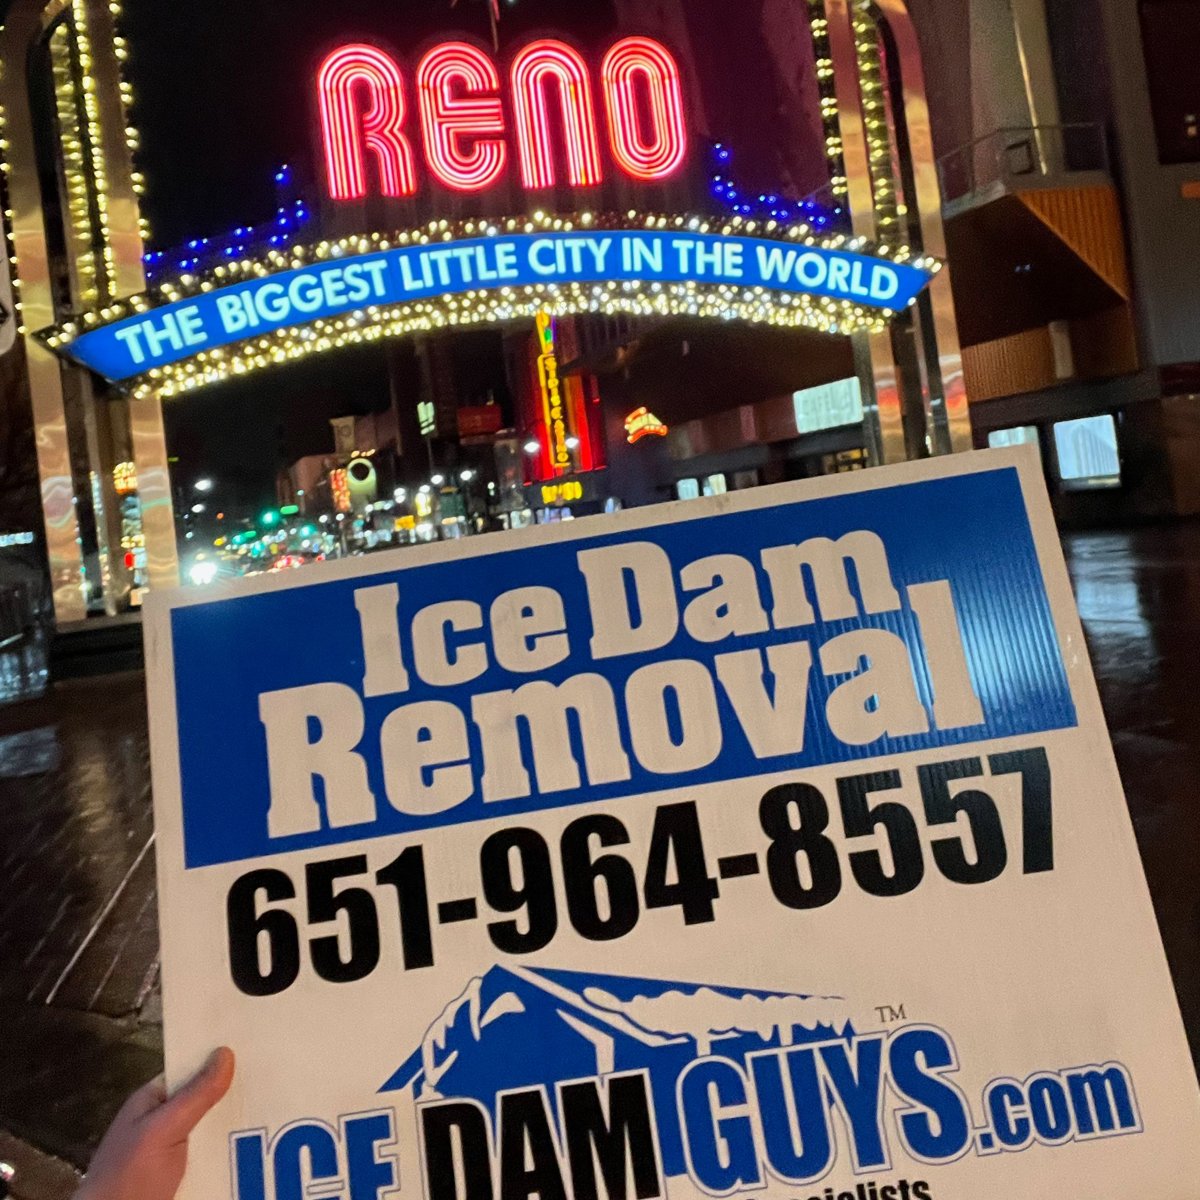 Bright lights, Big (Little) City, and BIG ice dams. We came and we conquered. #IceDamRemoval #IceDamDamage #WinterRoofing #FrozenGutters #RoofSnowRemoval #RoofLeaks #PreventIceDams
#reno #nevada #lights #icedamguys